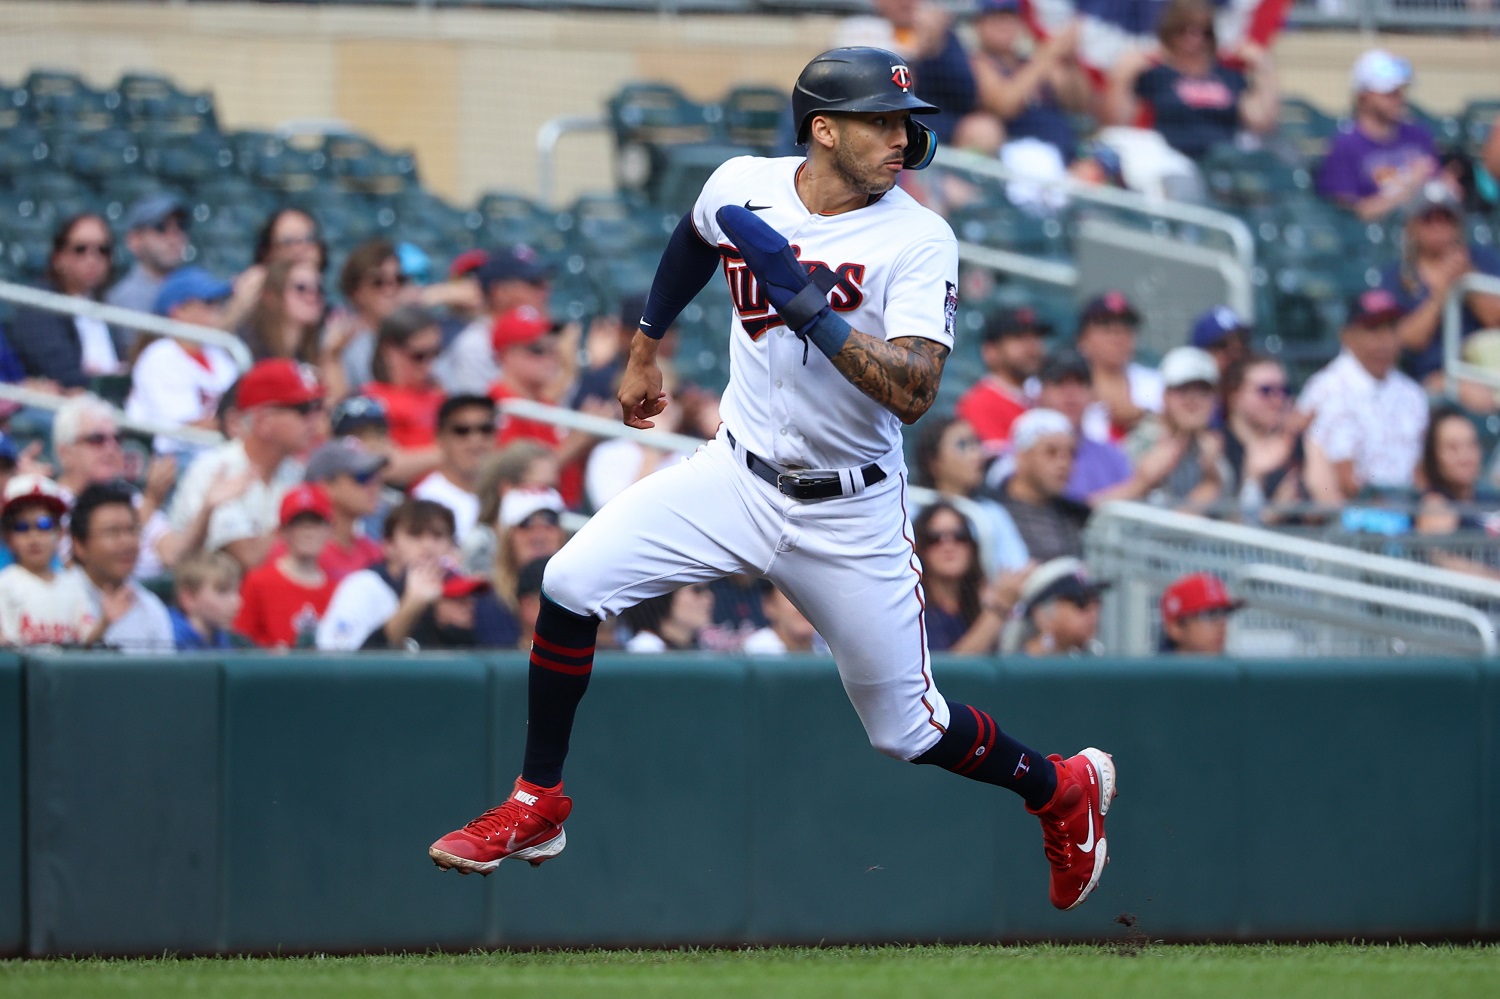 Carlos Correa rumors: Is he still worth the risk for Minnesota Twins?